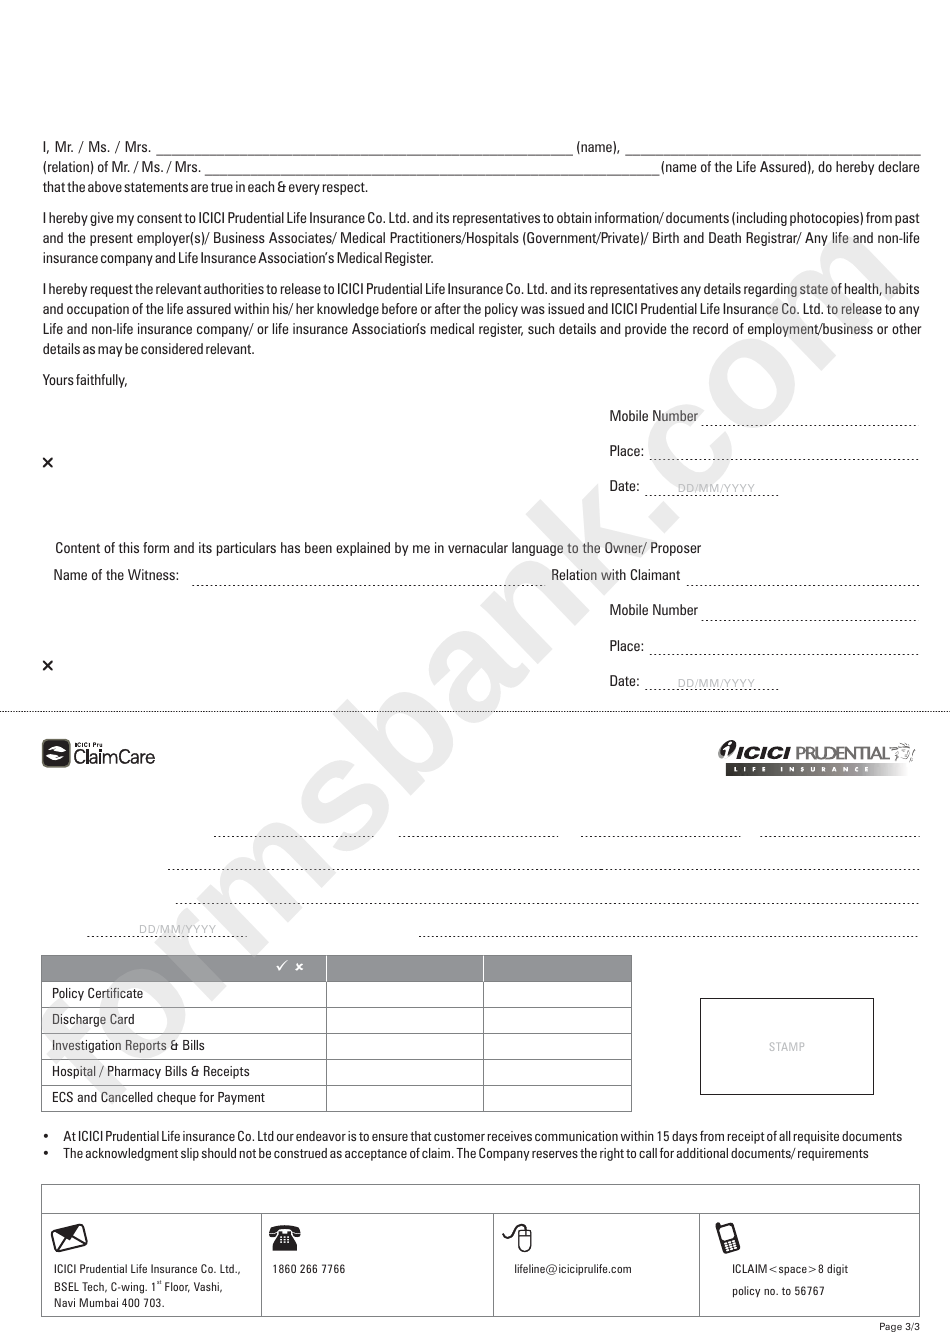 Claimant Statement Form